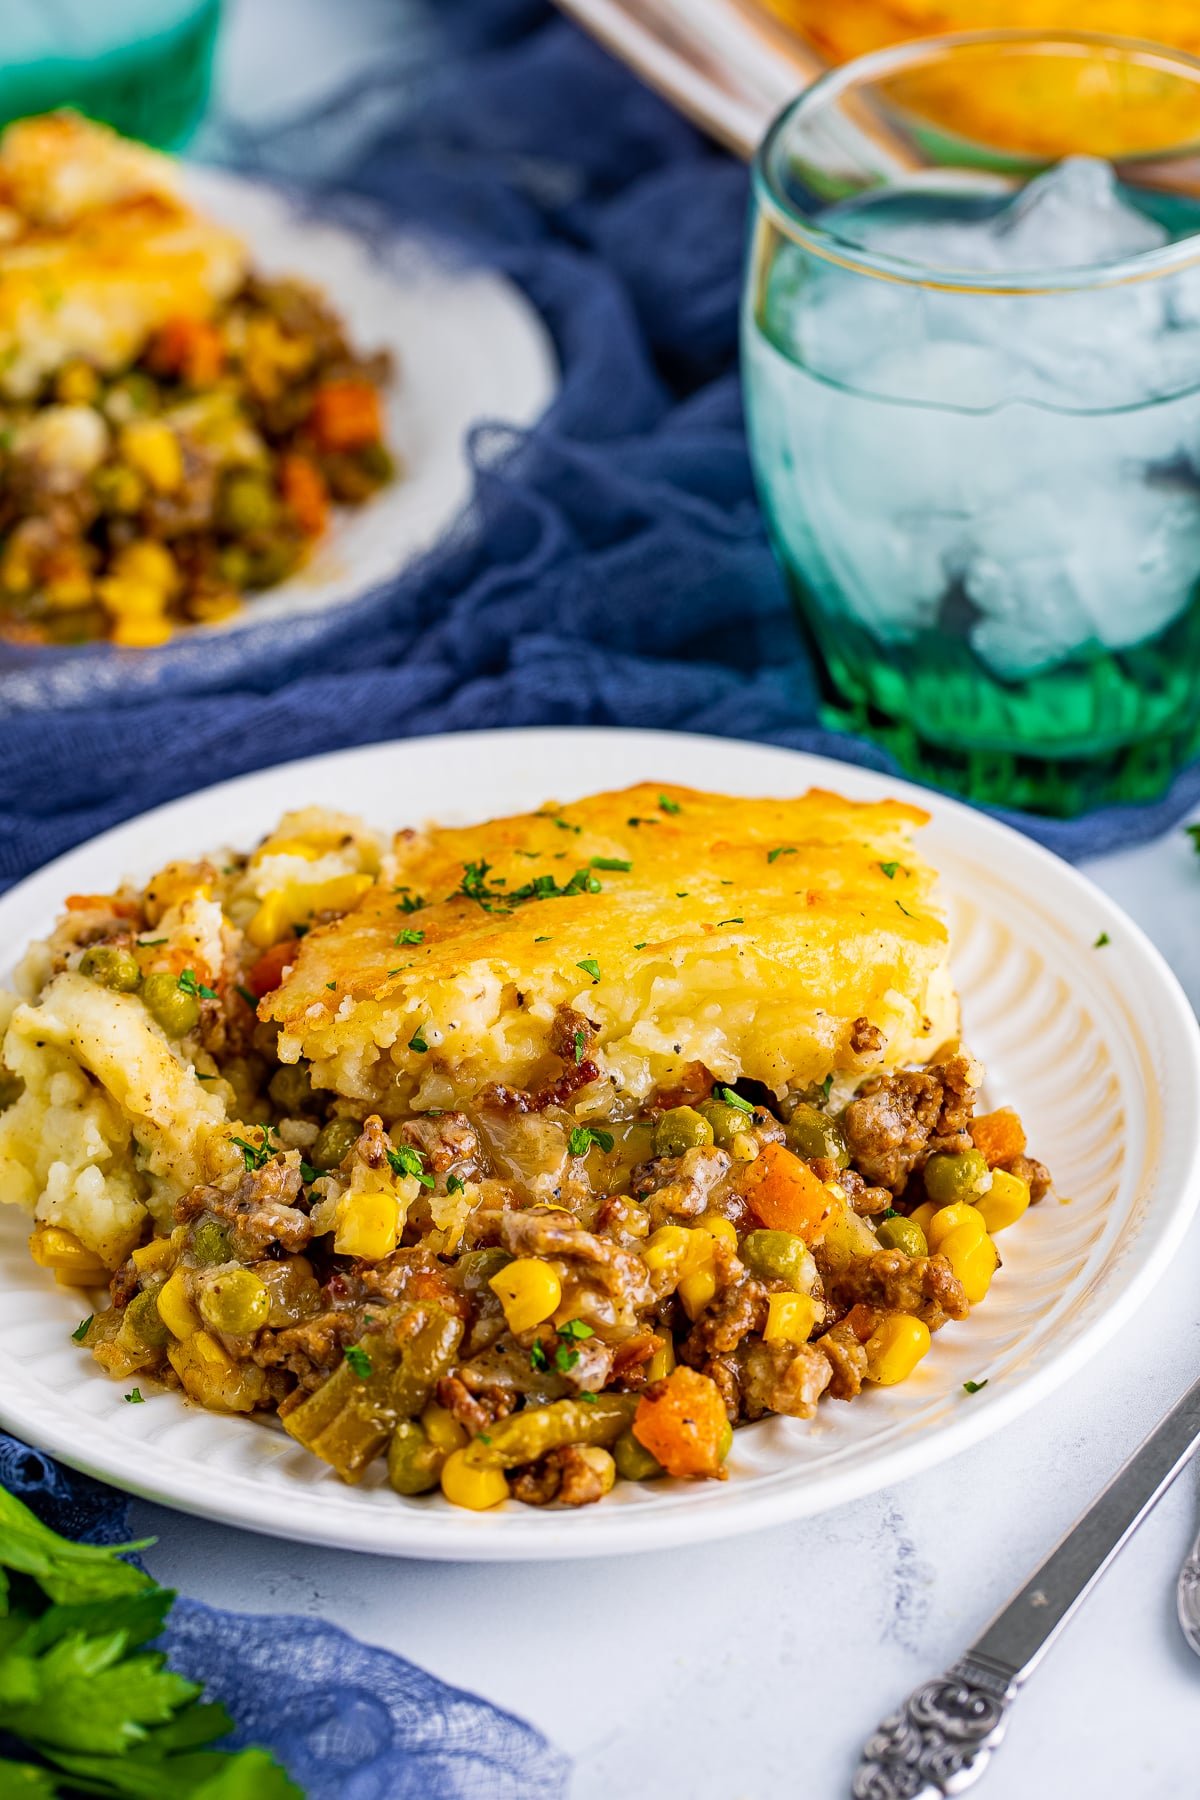 Easy Cottage Pie Recipe served on a white plate with glass of ice water and navy linen